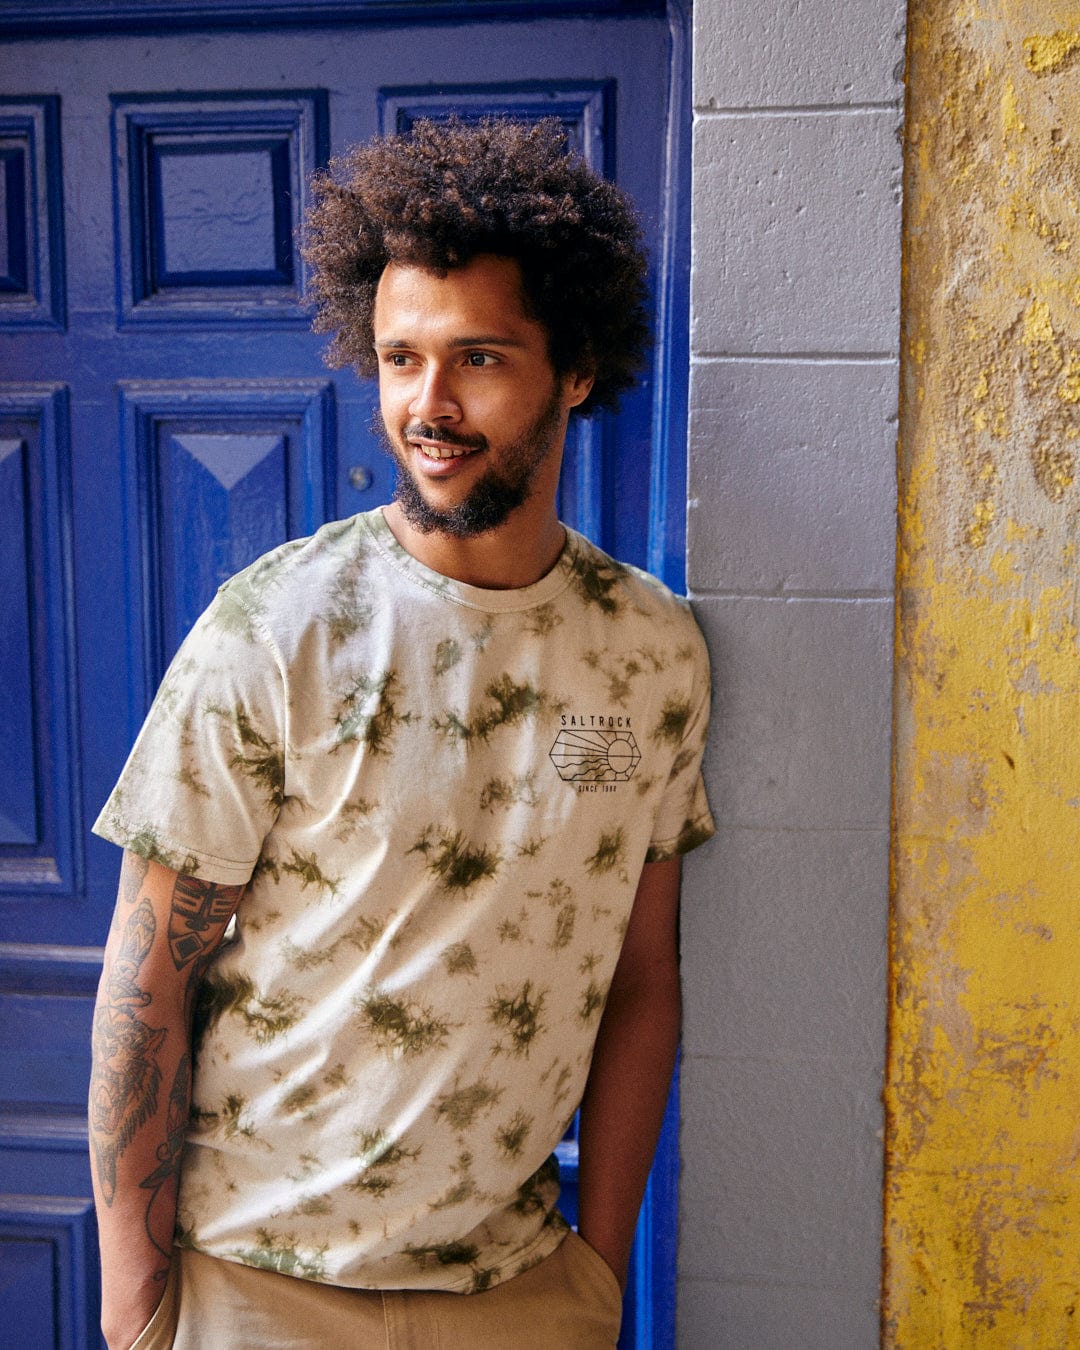 A young man with curly hair and a beard standing by a blue door, wearing a Saltrock Vantage Outline - Mens Tie Dye T-Shirt in Green and khaki pants, smiling slightly.